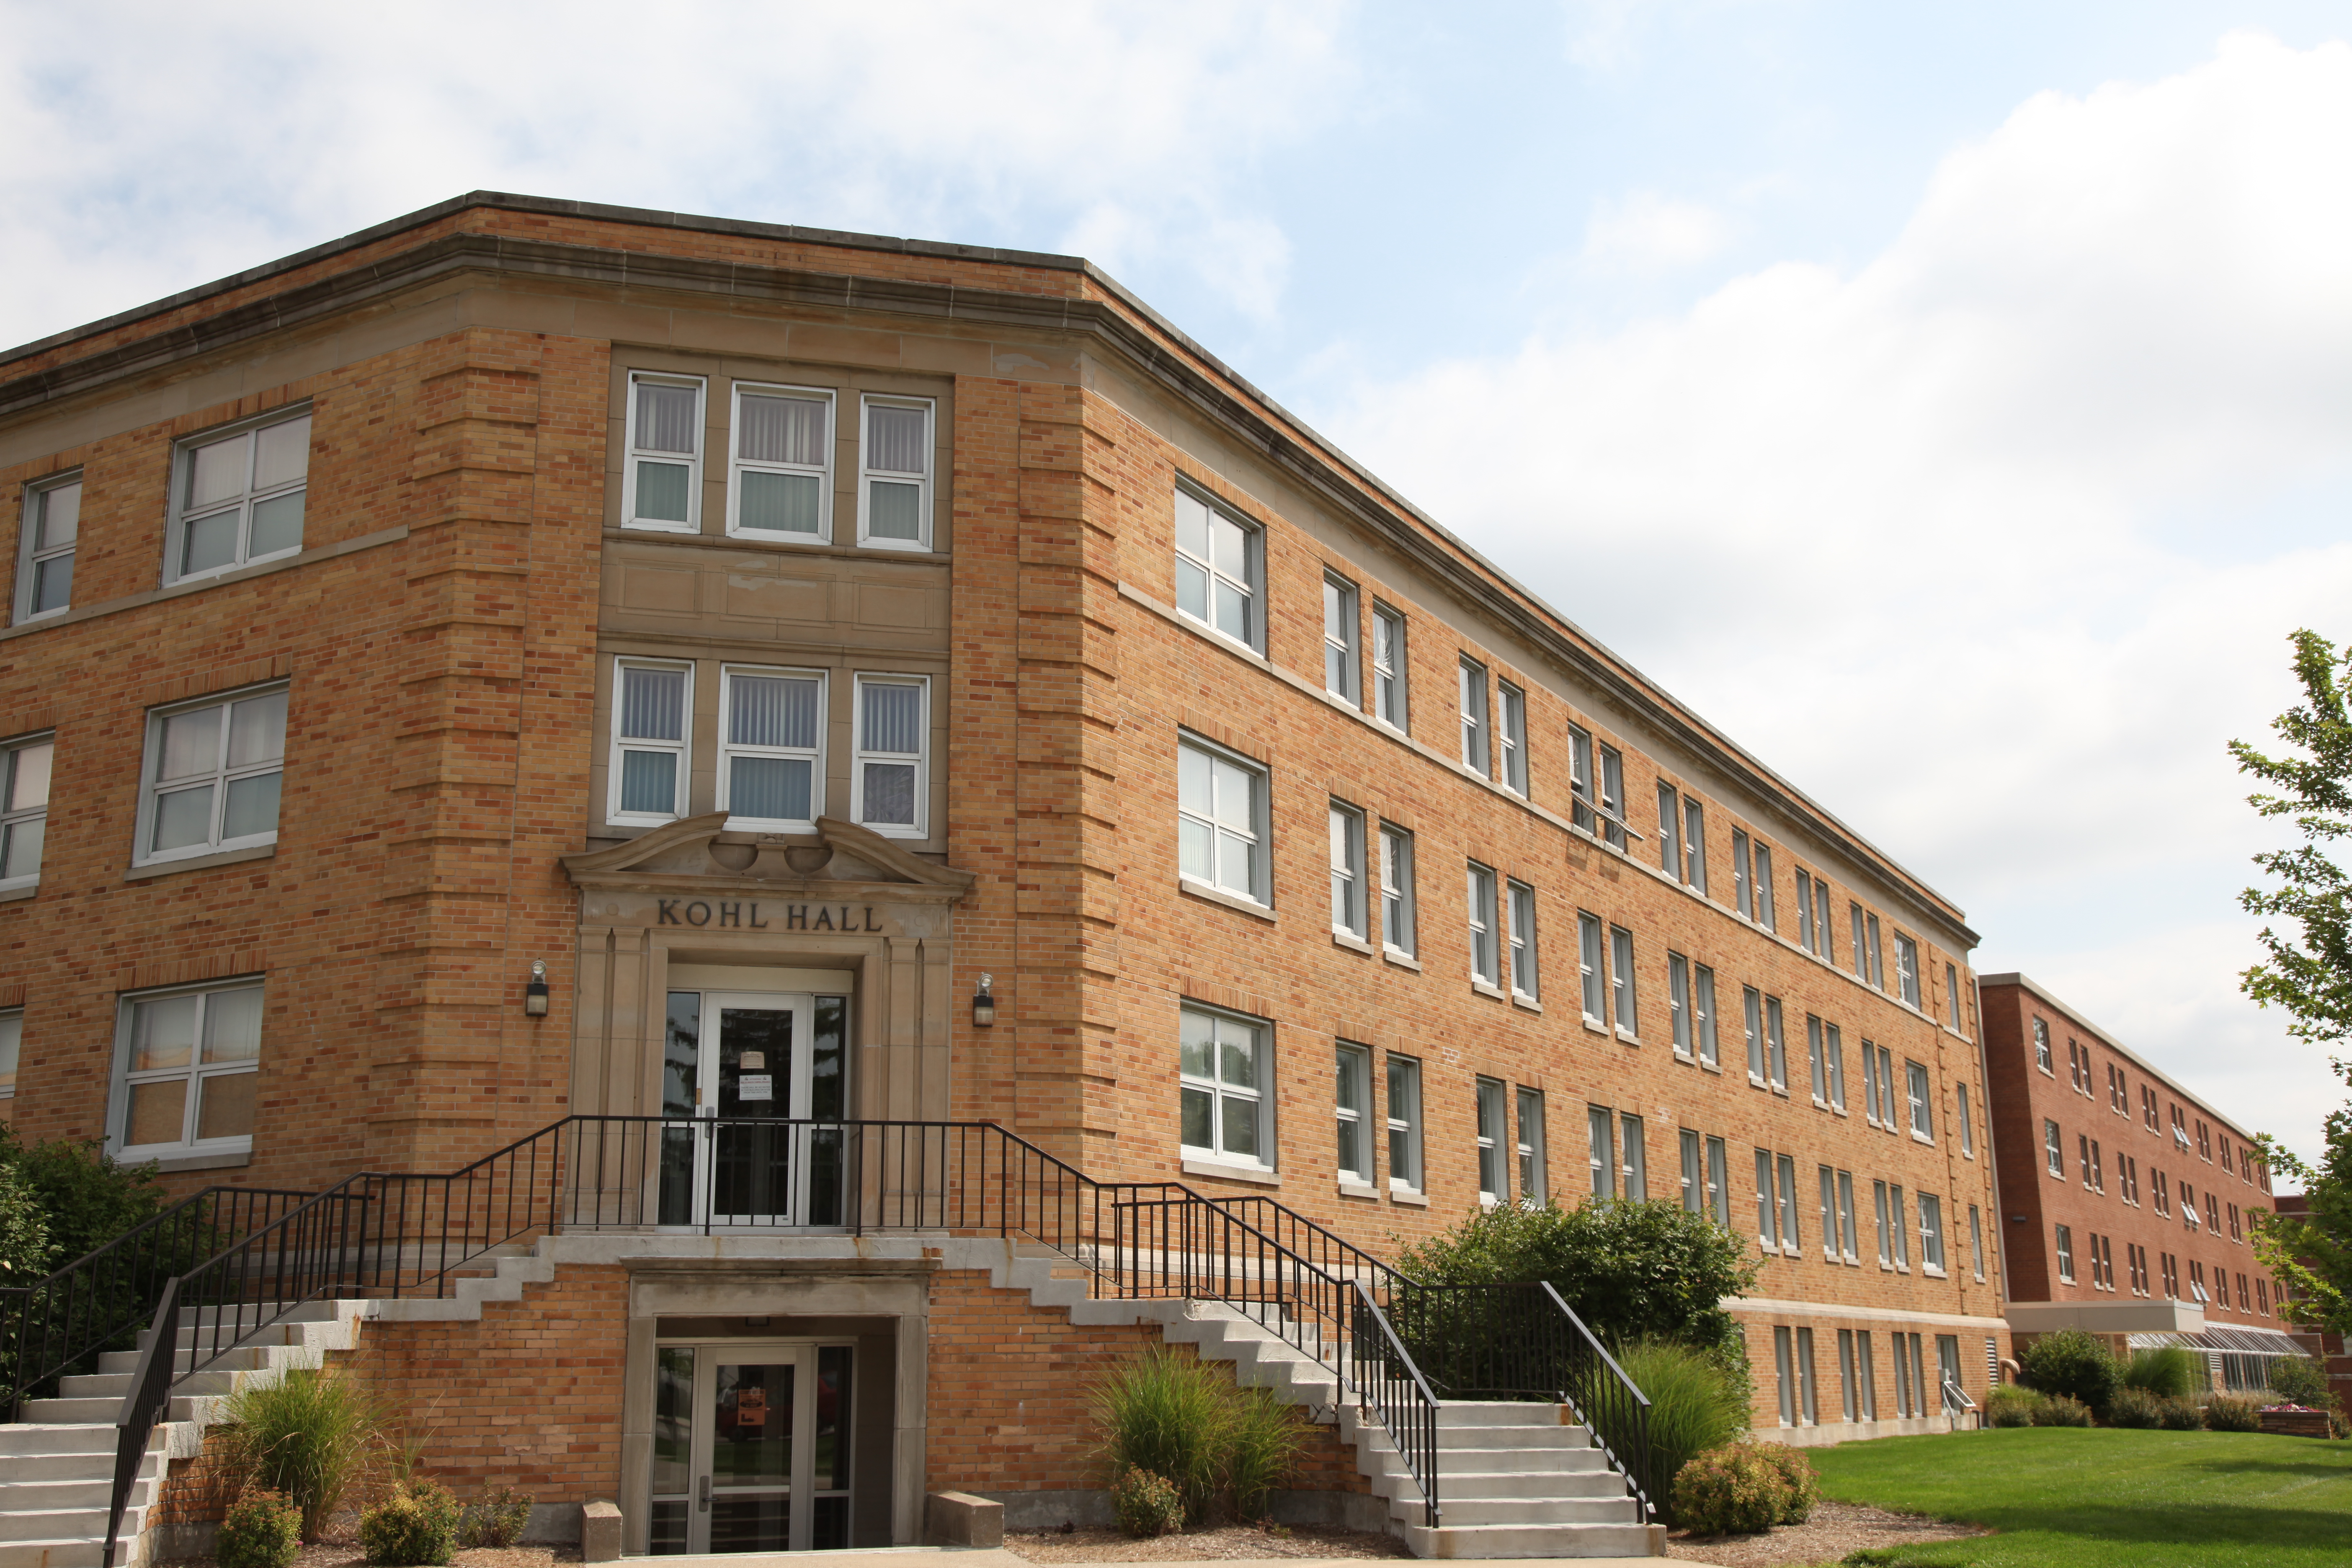 Exterior Image of Kohl Hall on a sunny day.